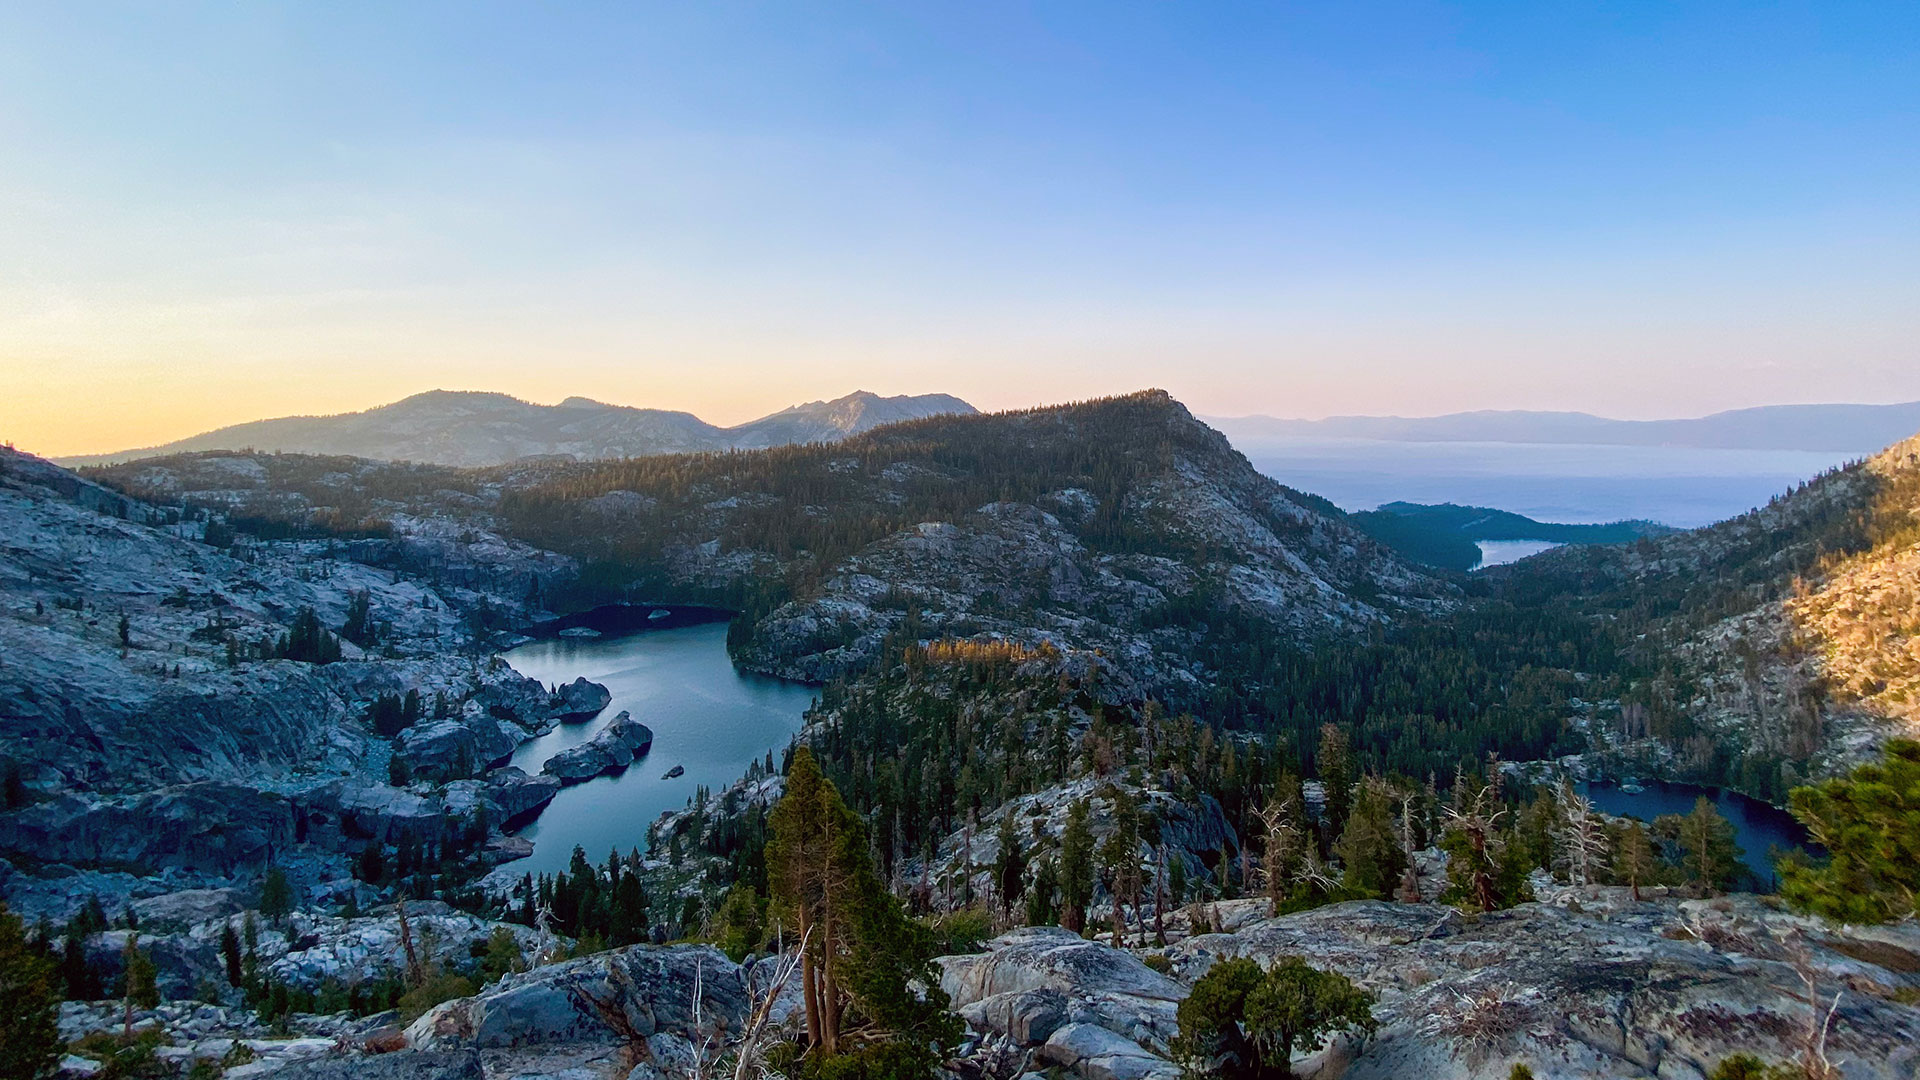 Lake Tahoe's backcountry from Mountain View